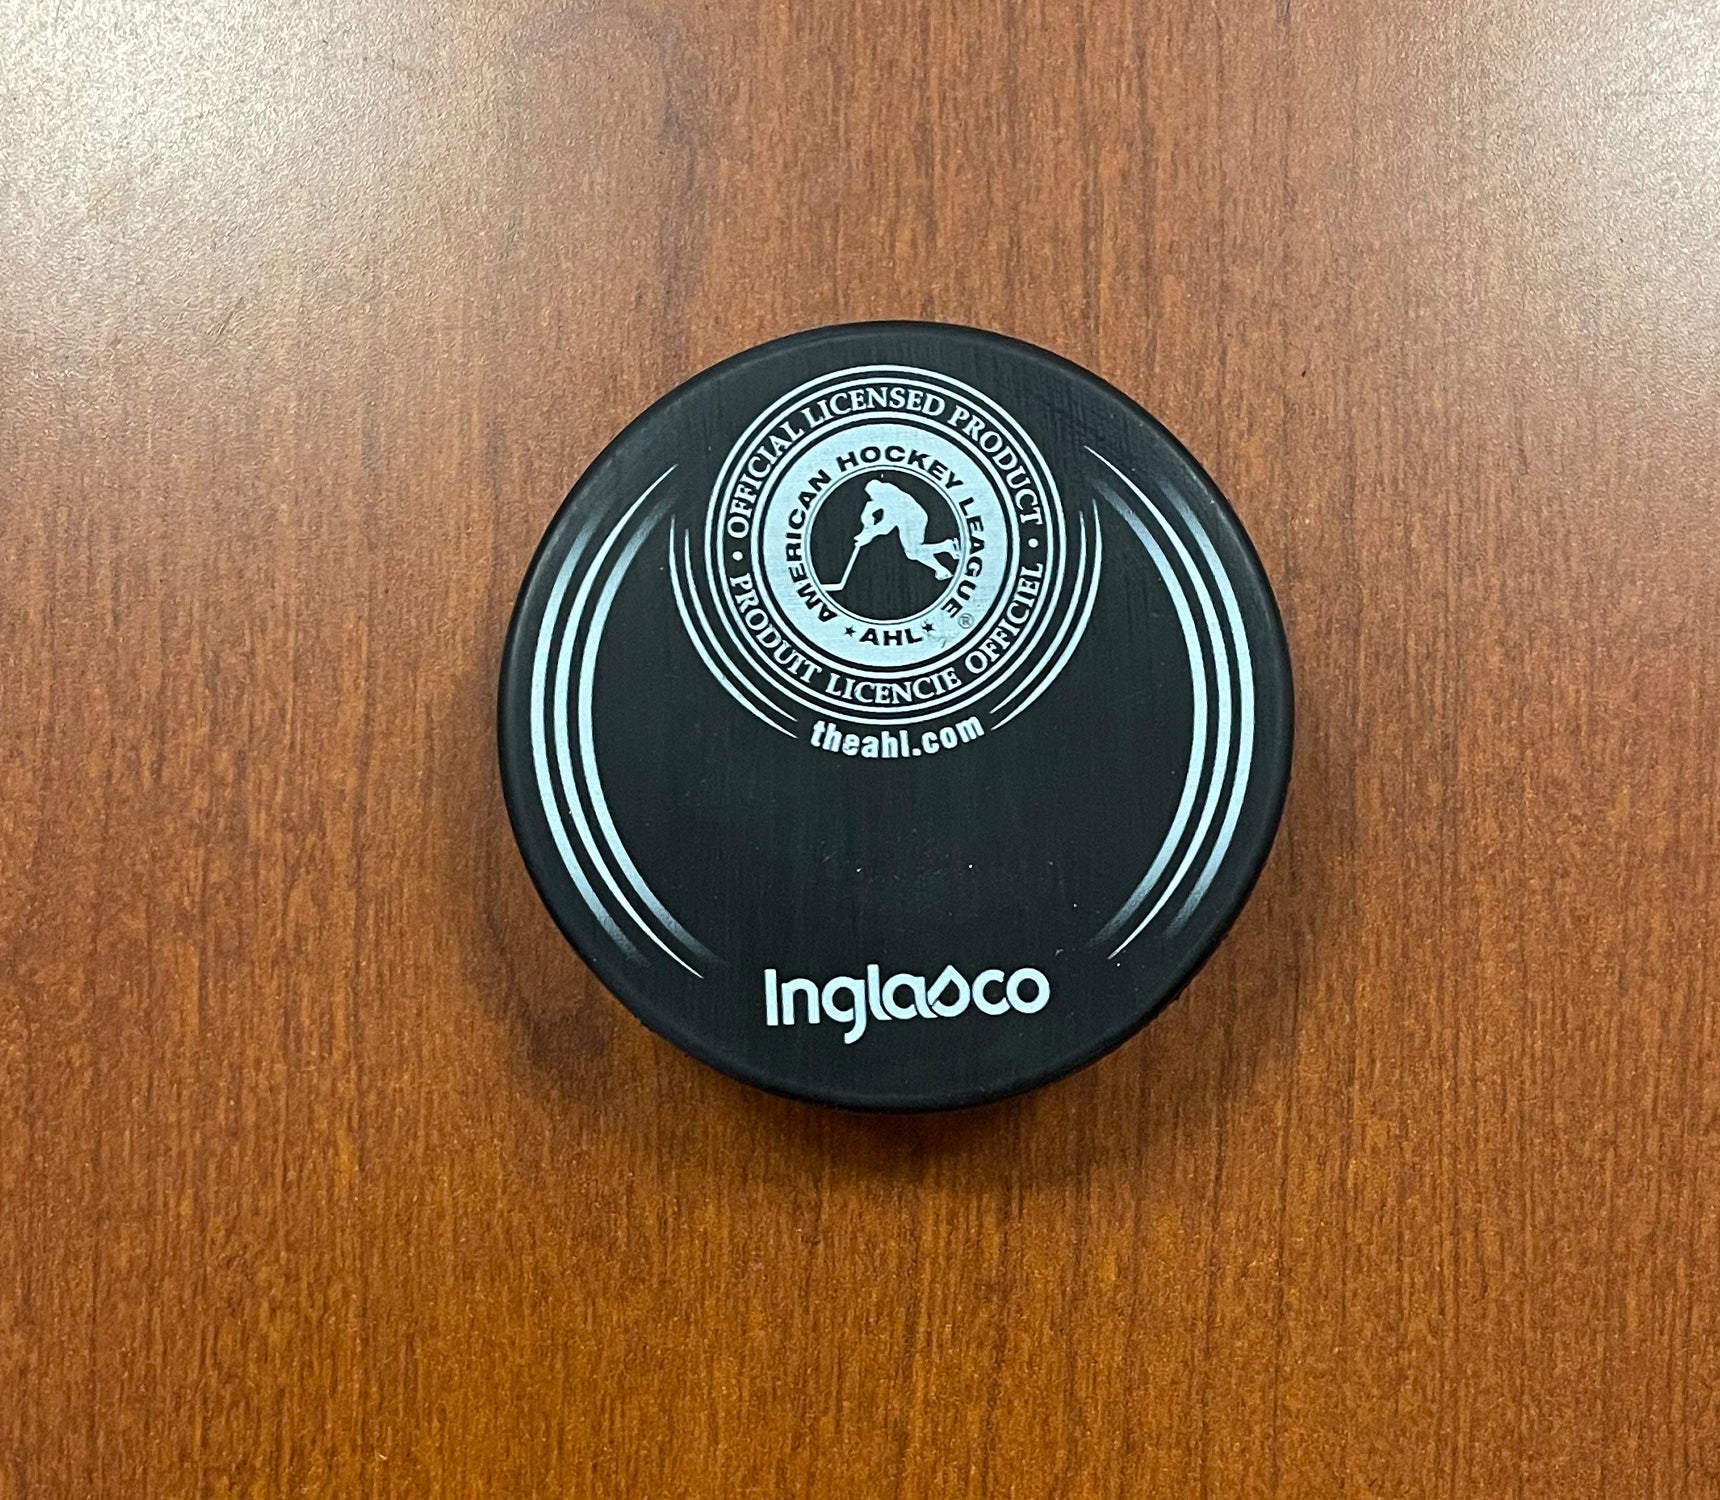 Winter Olympics Autographed Pucks for sale